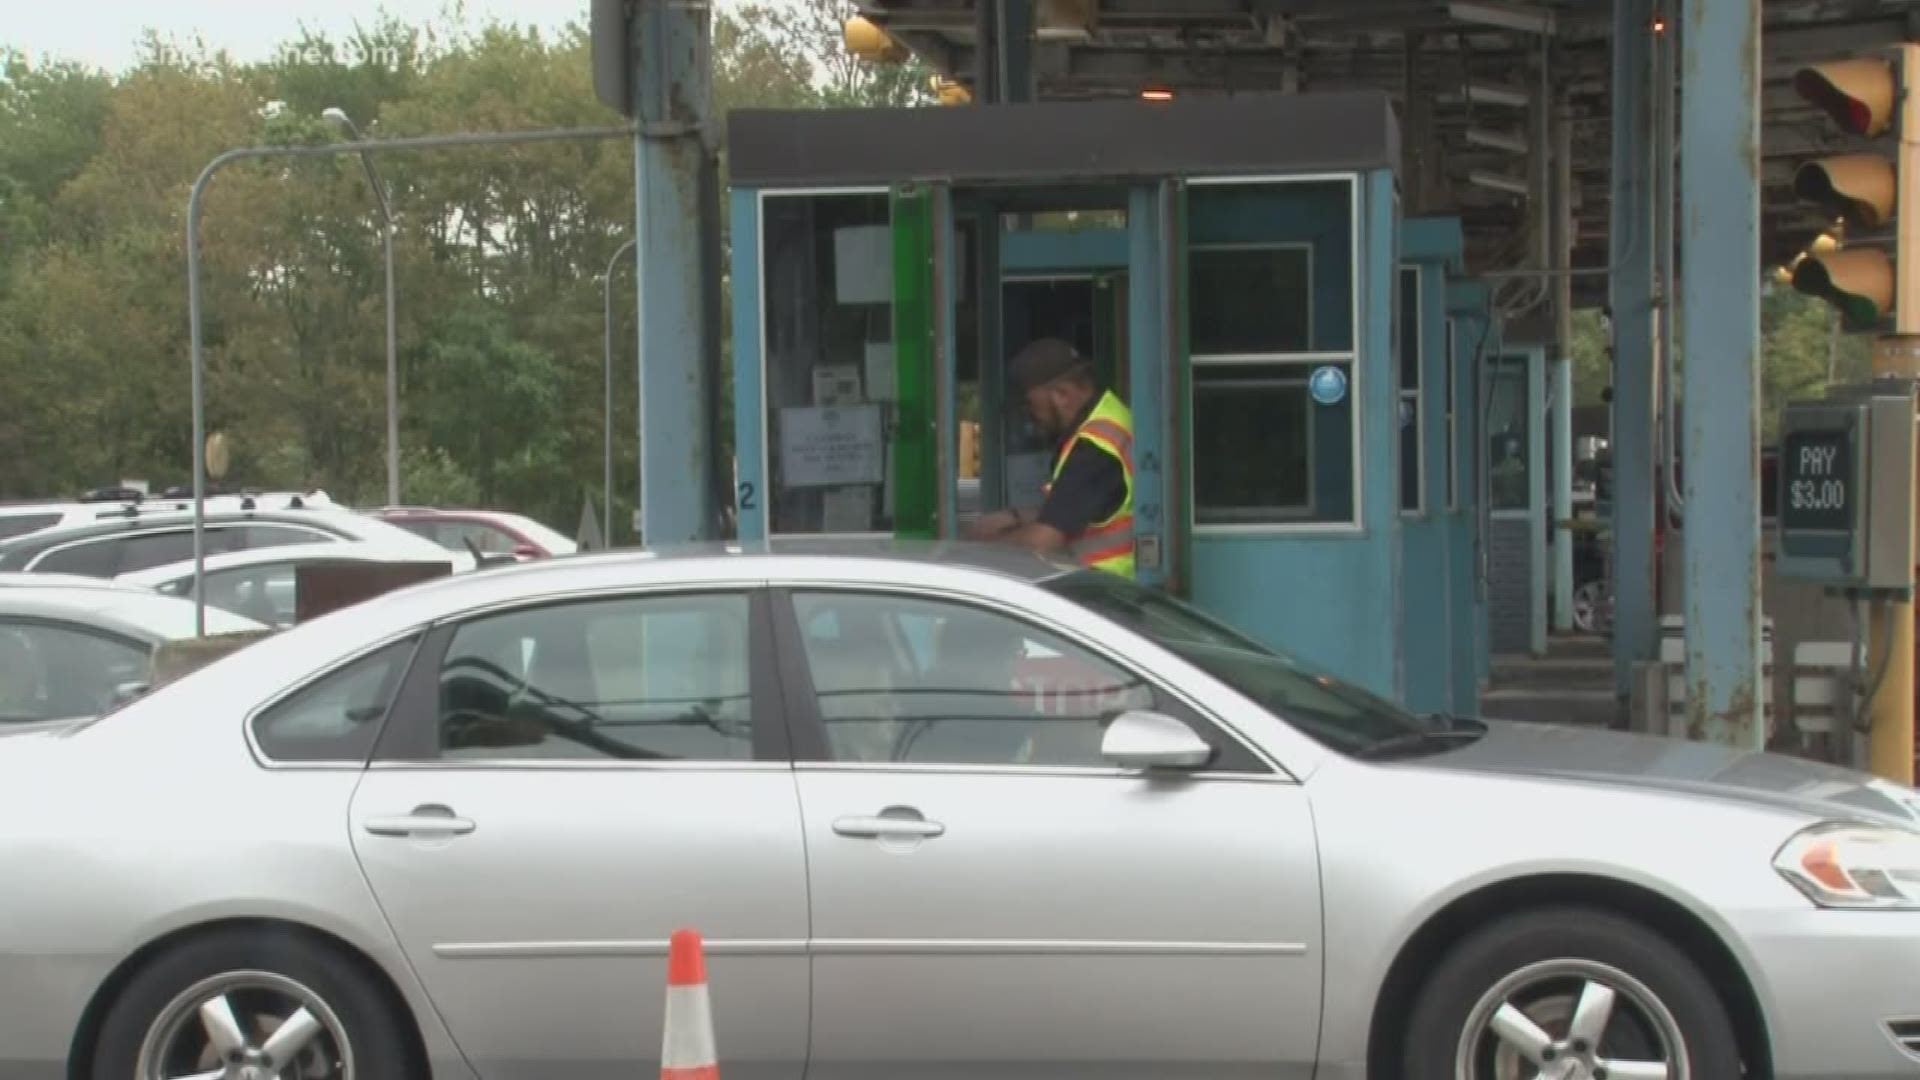 If you skip out on tolls when driving the Maine Turnpike, you may run into trouble when you try to register your car.